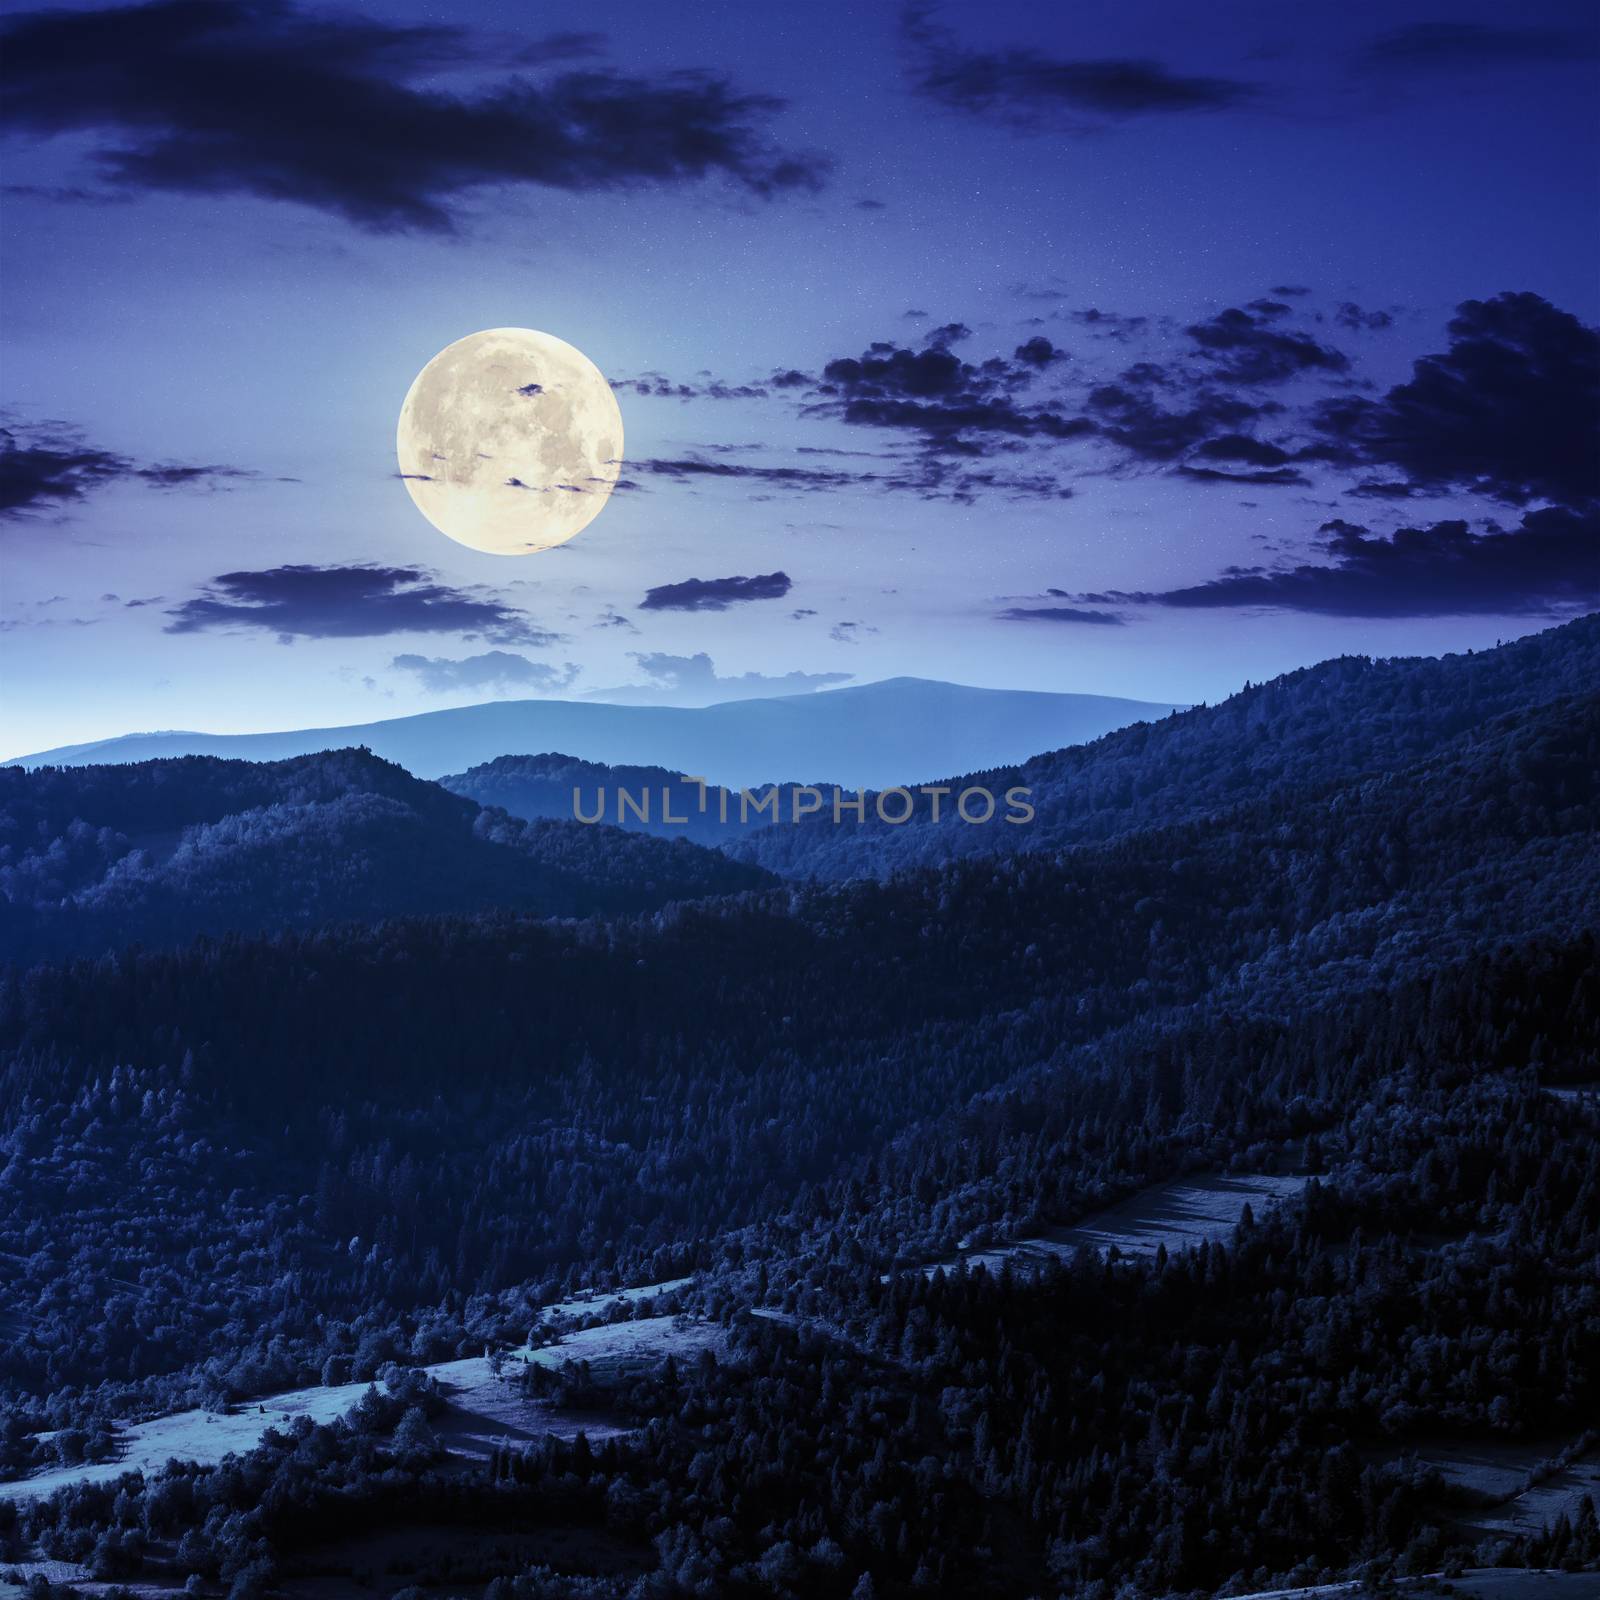 mountain range with coniferous forest on its slopes at night in full moon light